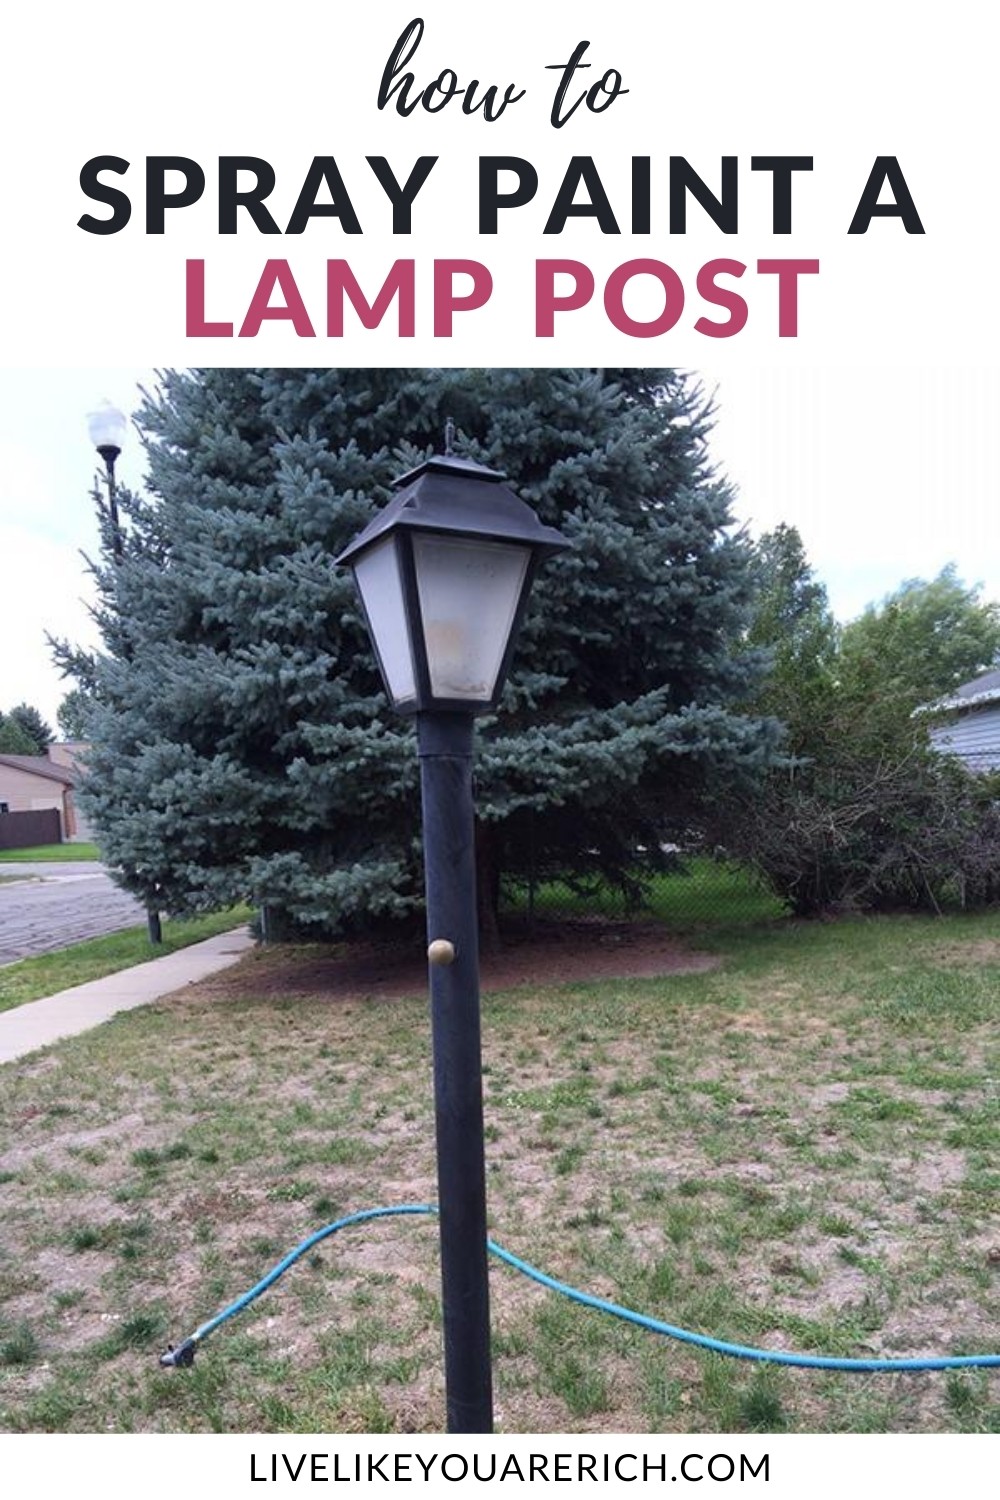 Our old house is mainly white blueish-grey siding and and brown. But our mailbox and lamp post are black and I really dislike the clash. So instead of buying a new lamp post, I decided to spray paint it. Sharing the steps on how I paint my lamp post.